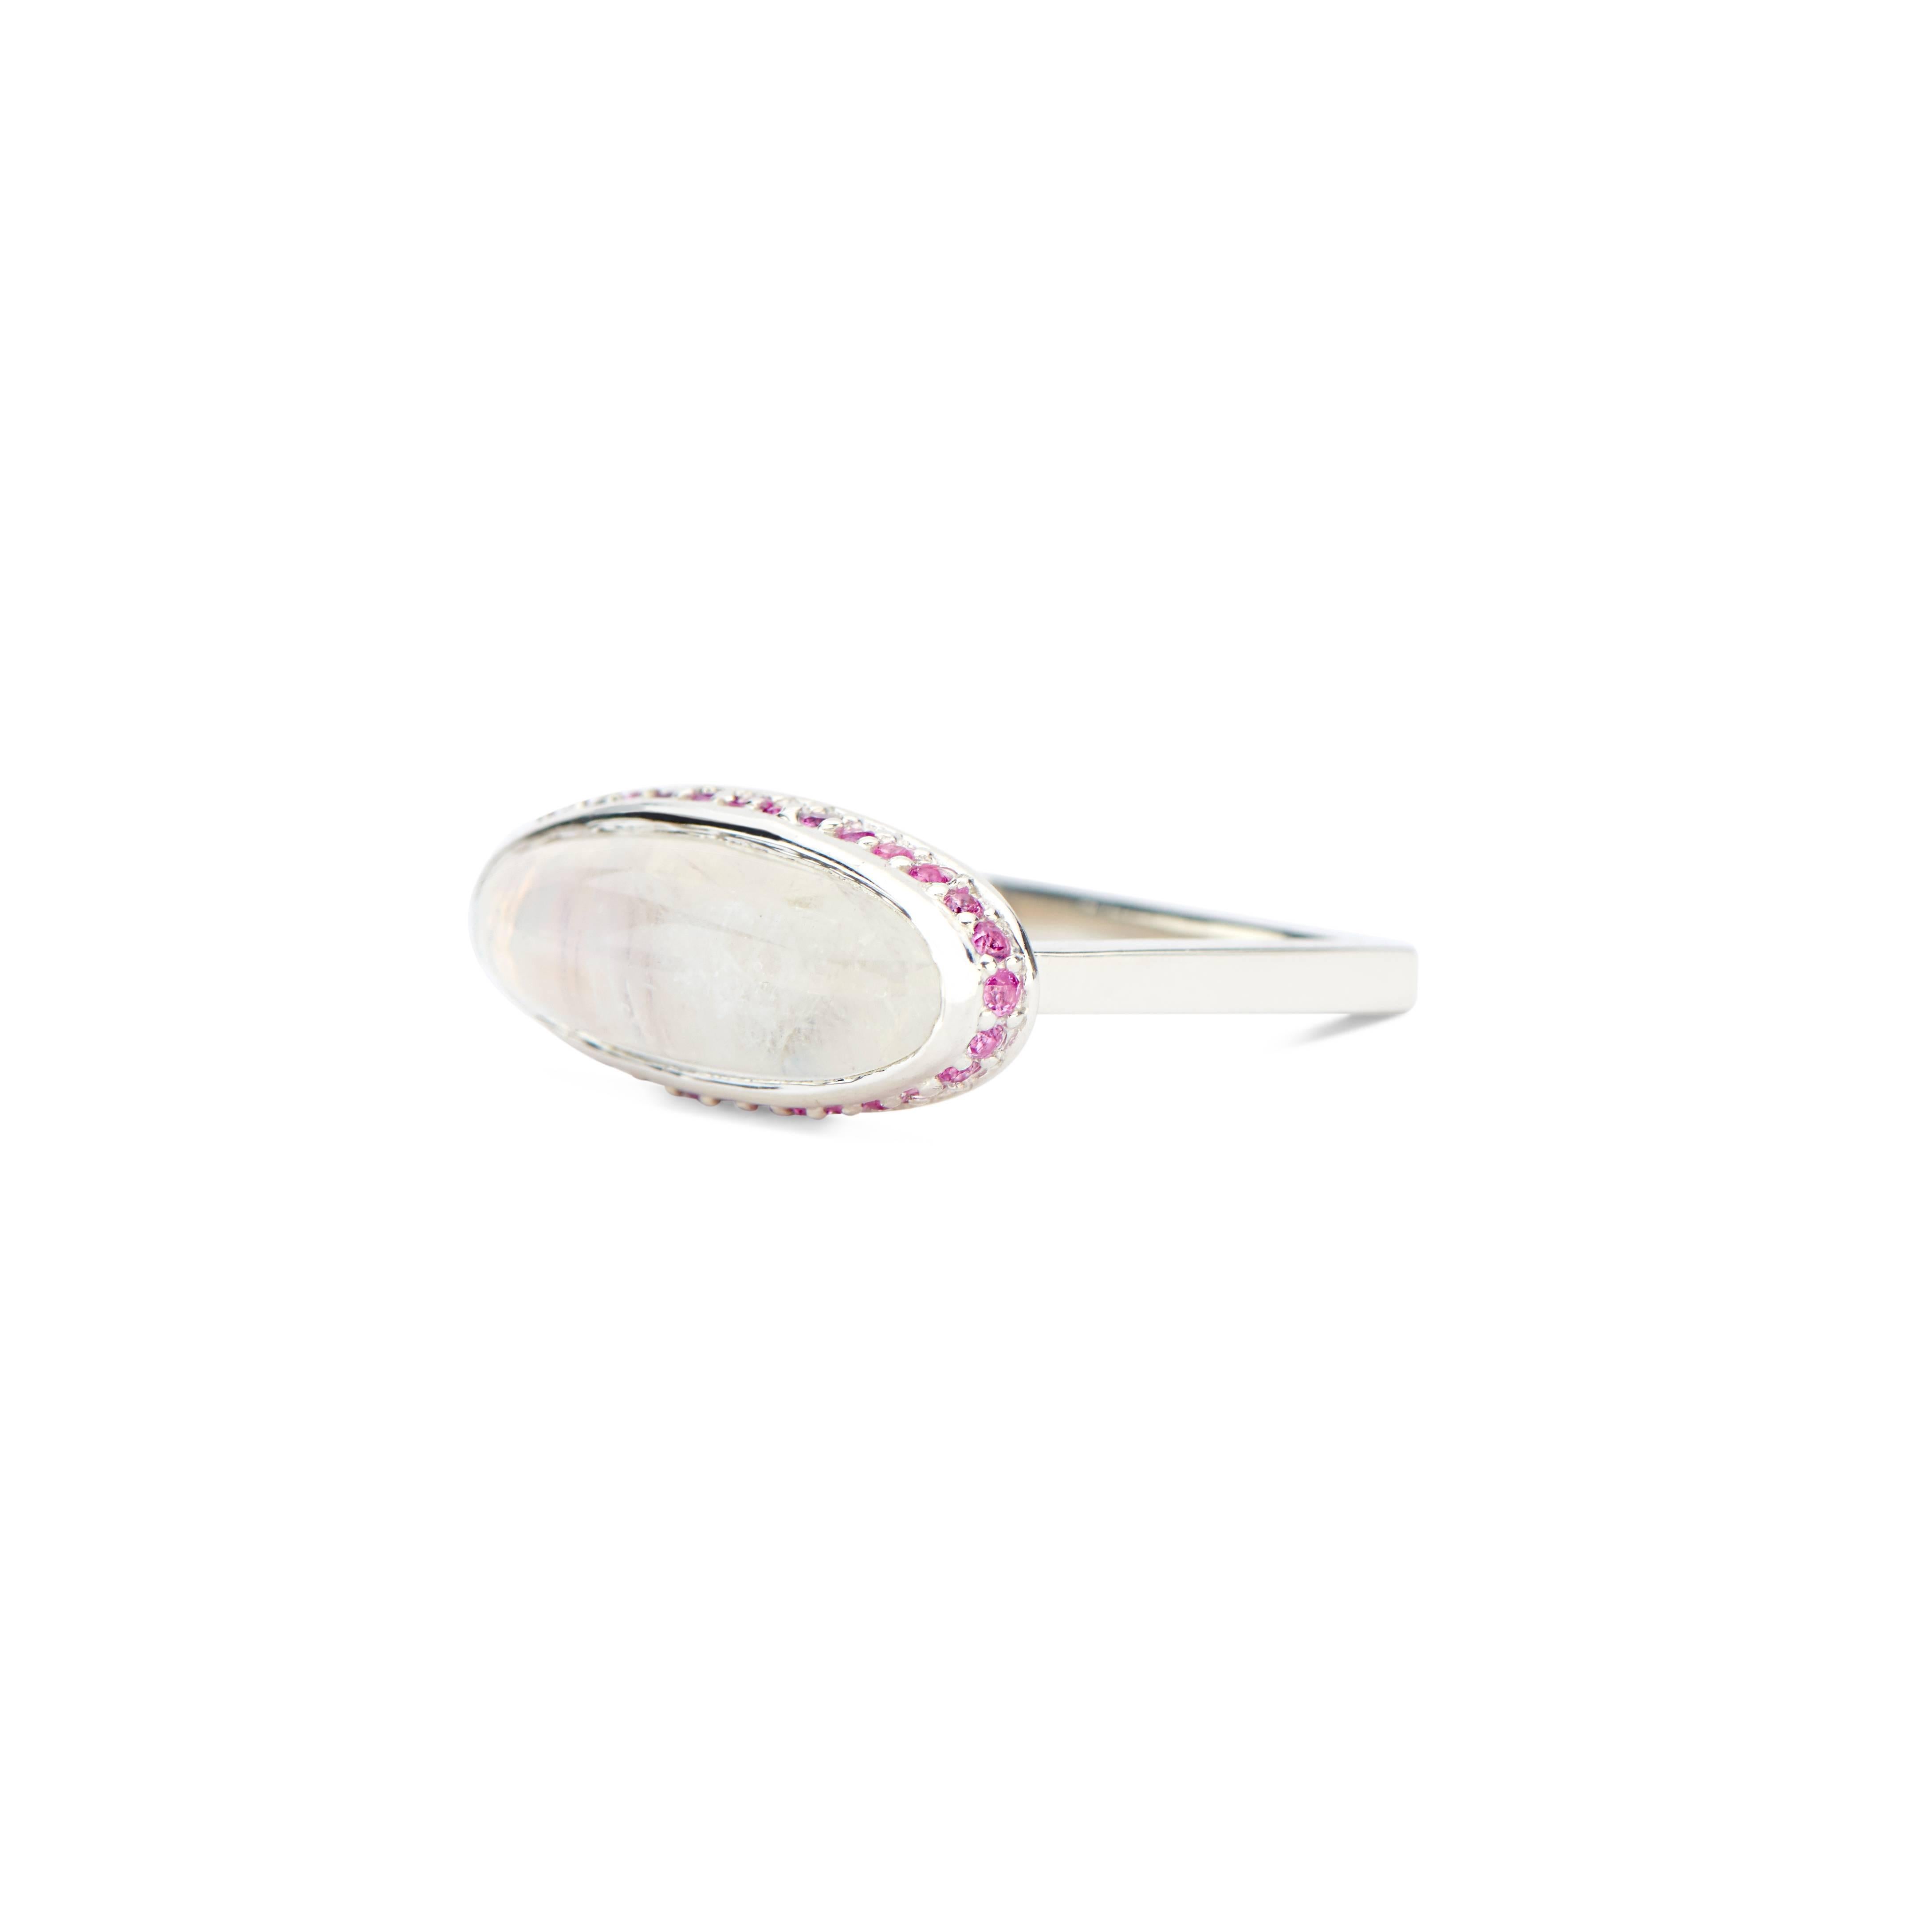 This sterling silver ring features a beautiful moonstone cabochon set in the center and surrounded by a halo of 34 light pink sapphires. It is a thoroughly contemporary style with feminine details.  The shank's unique shape is incredibly lightweight